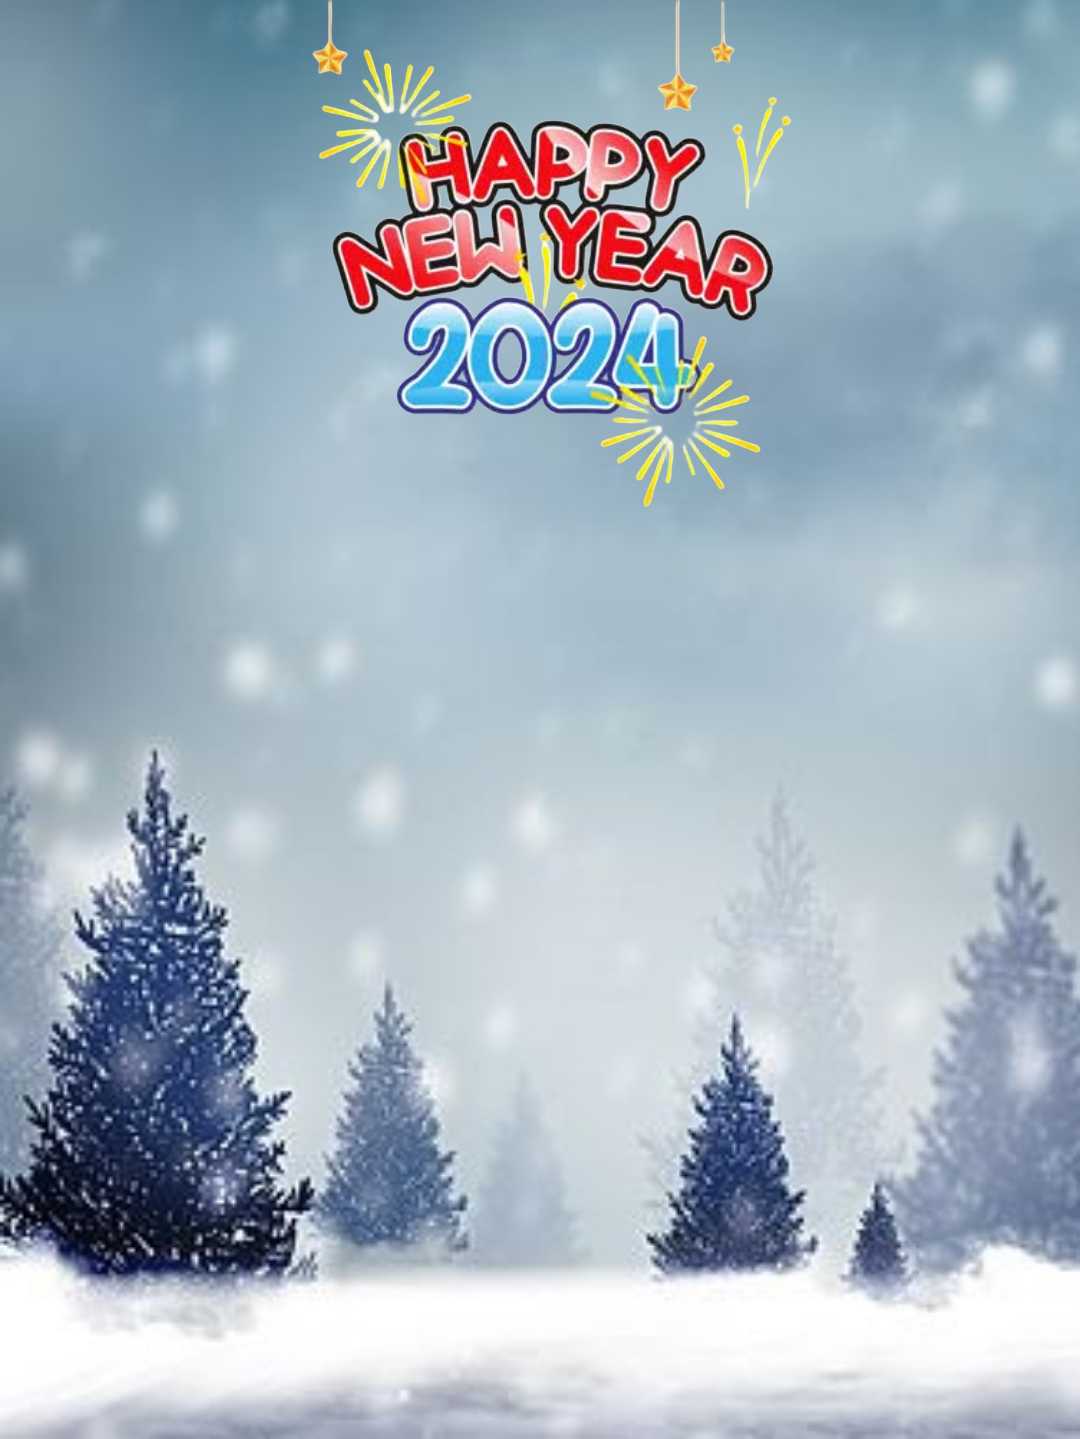 New Year background free download